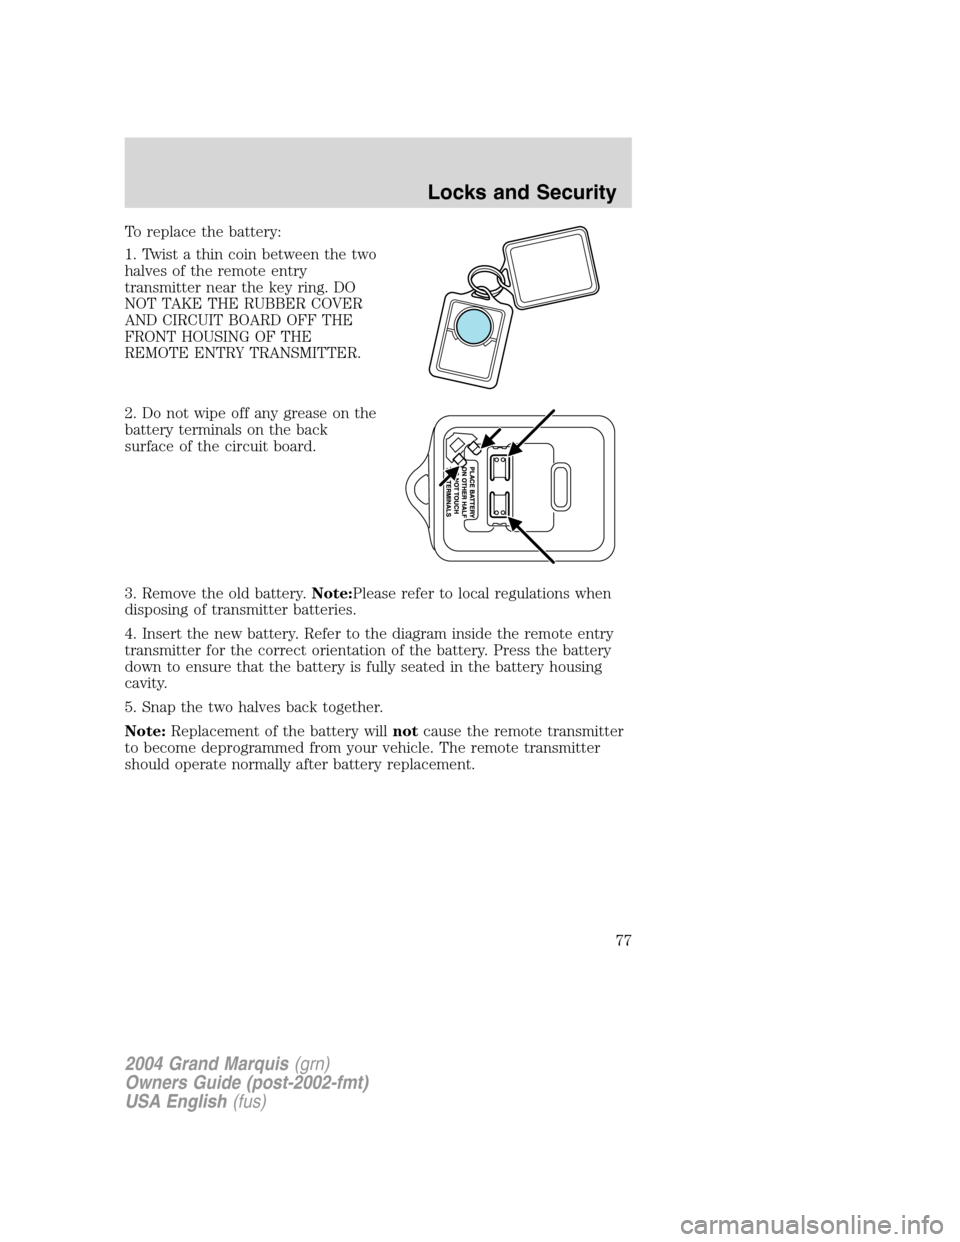 Mercury Grand Marquis 2004  Owners Manuals To replace the battery:
1. Twist a thin coin between the two
halves of the remote entry
transmitter near the key ring. DO
NOT TAKE THE RUBBER COVER
AND CIRCUIT BOARD OFF THE
FRONT HOUSING OF THE
REMOT